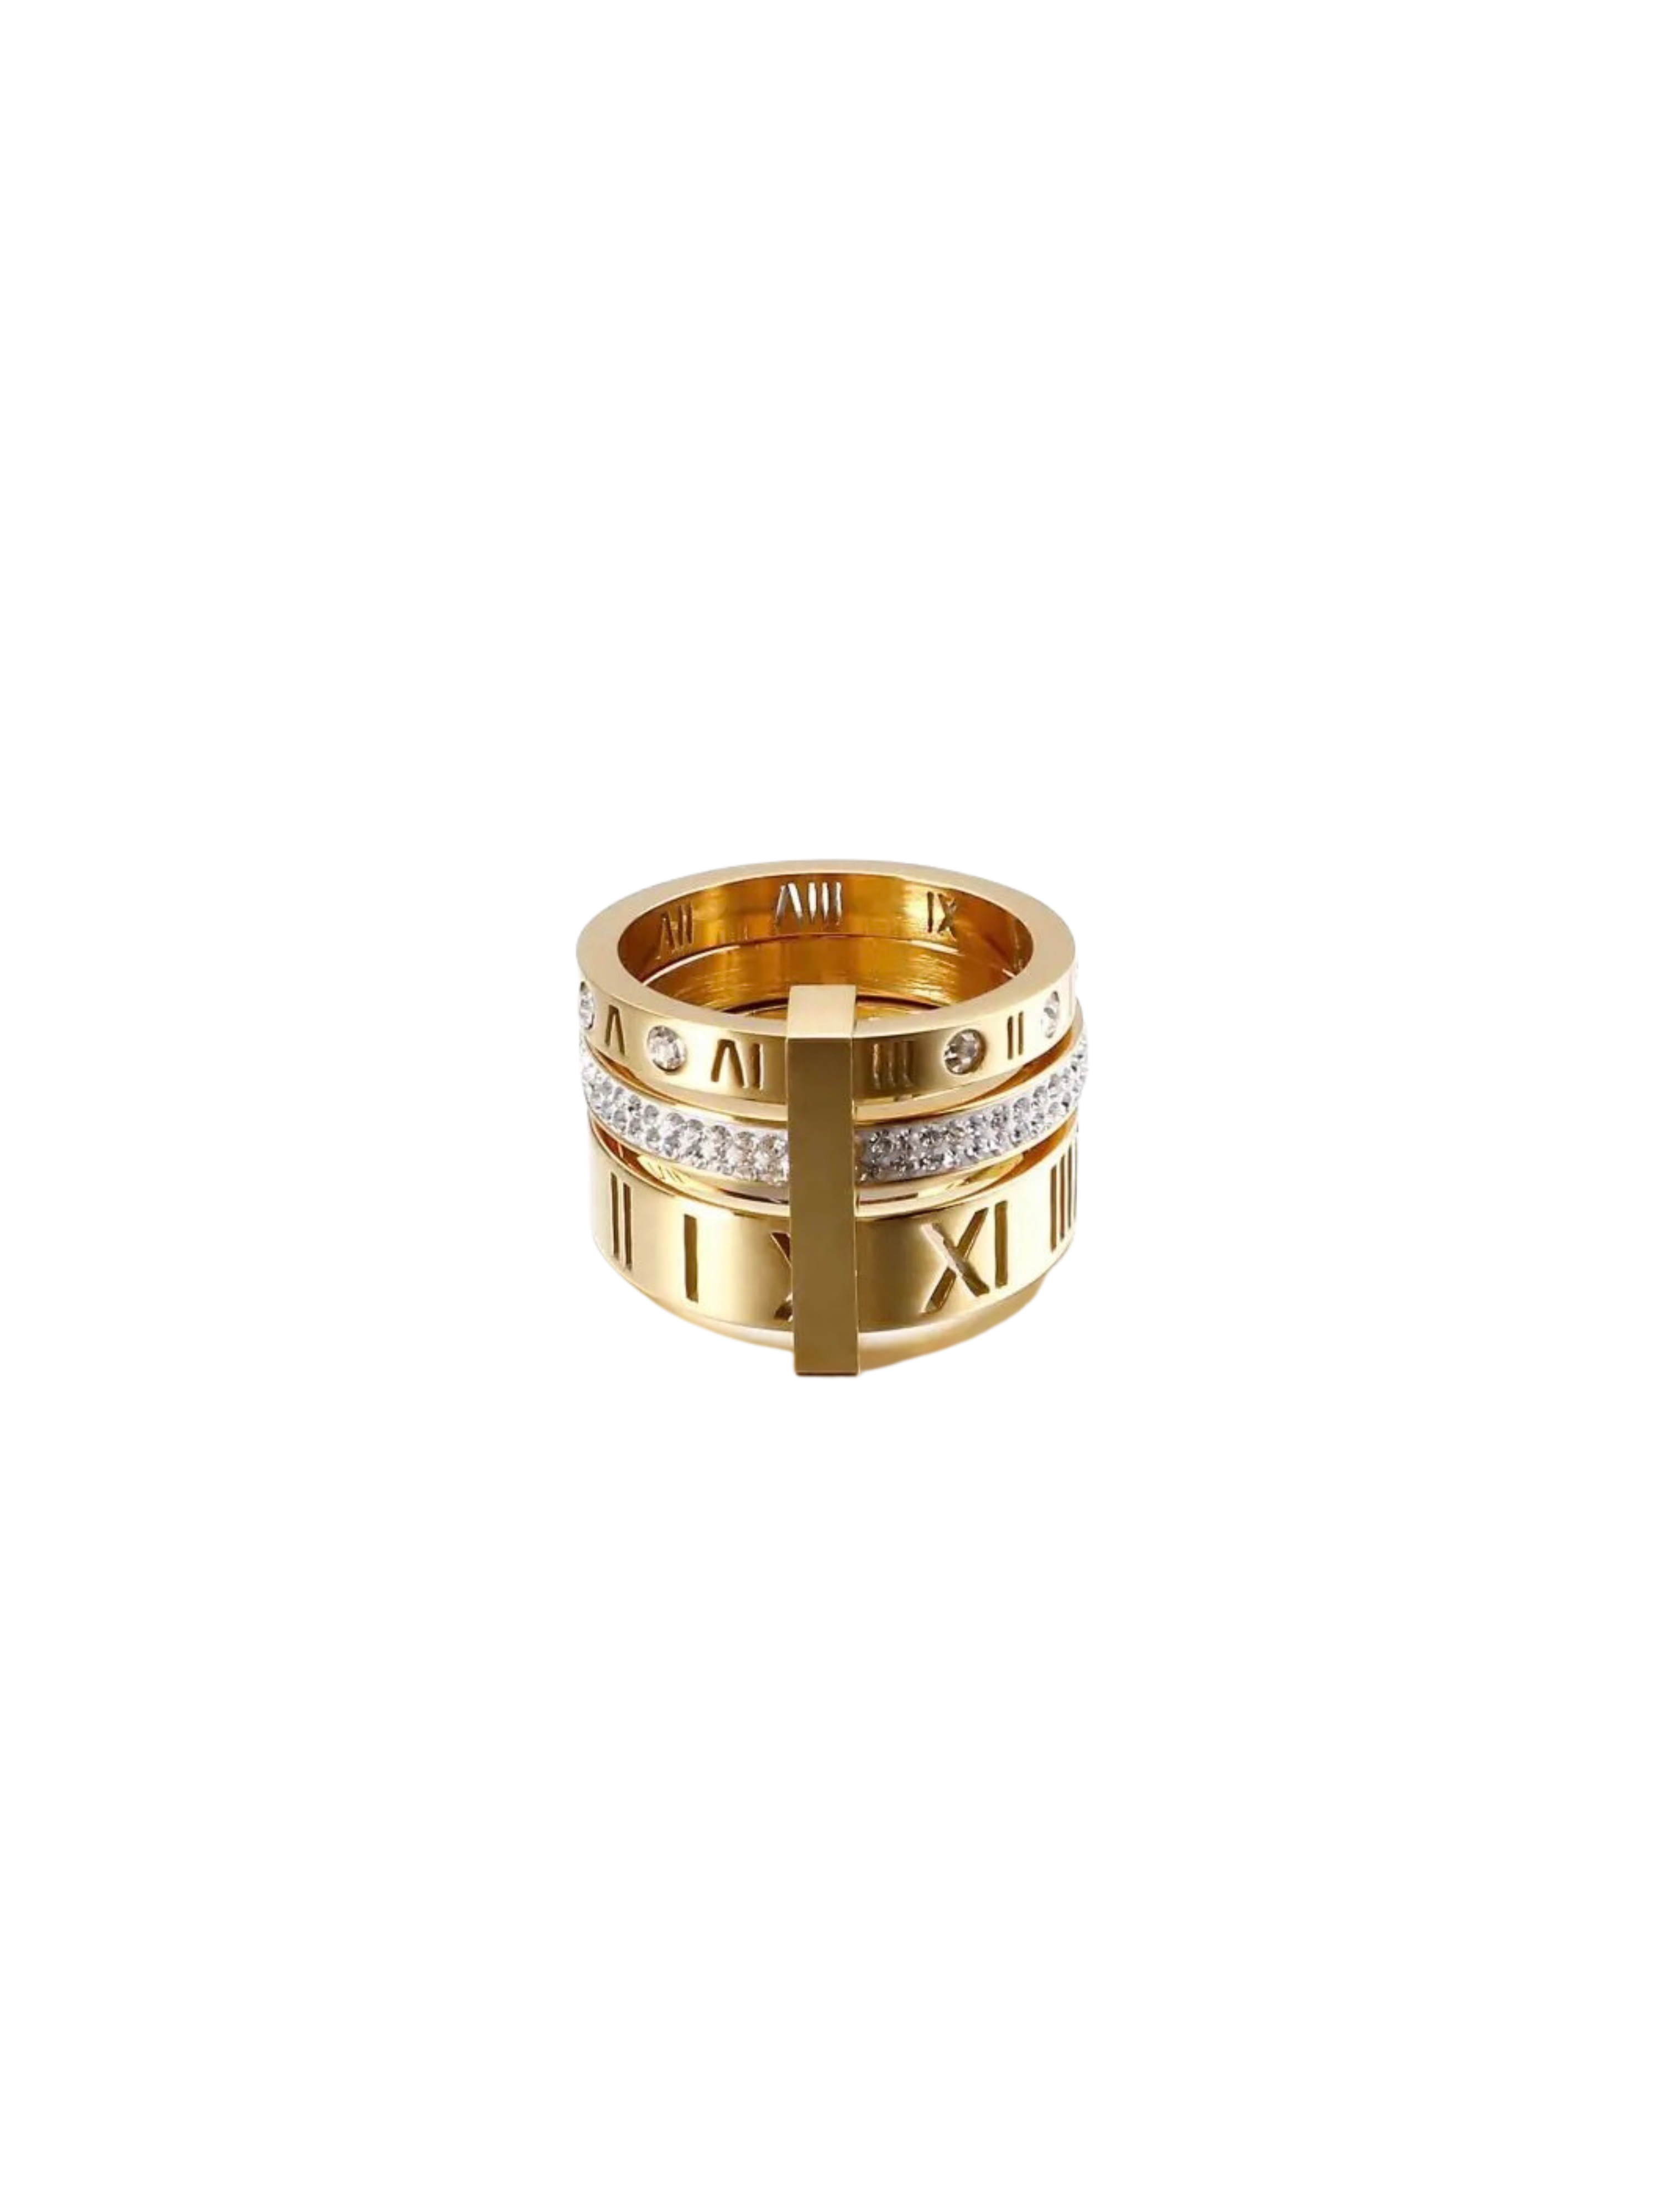 GOLDxTEAL gold triple stack ring accented with glimmering cubic zirconia.